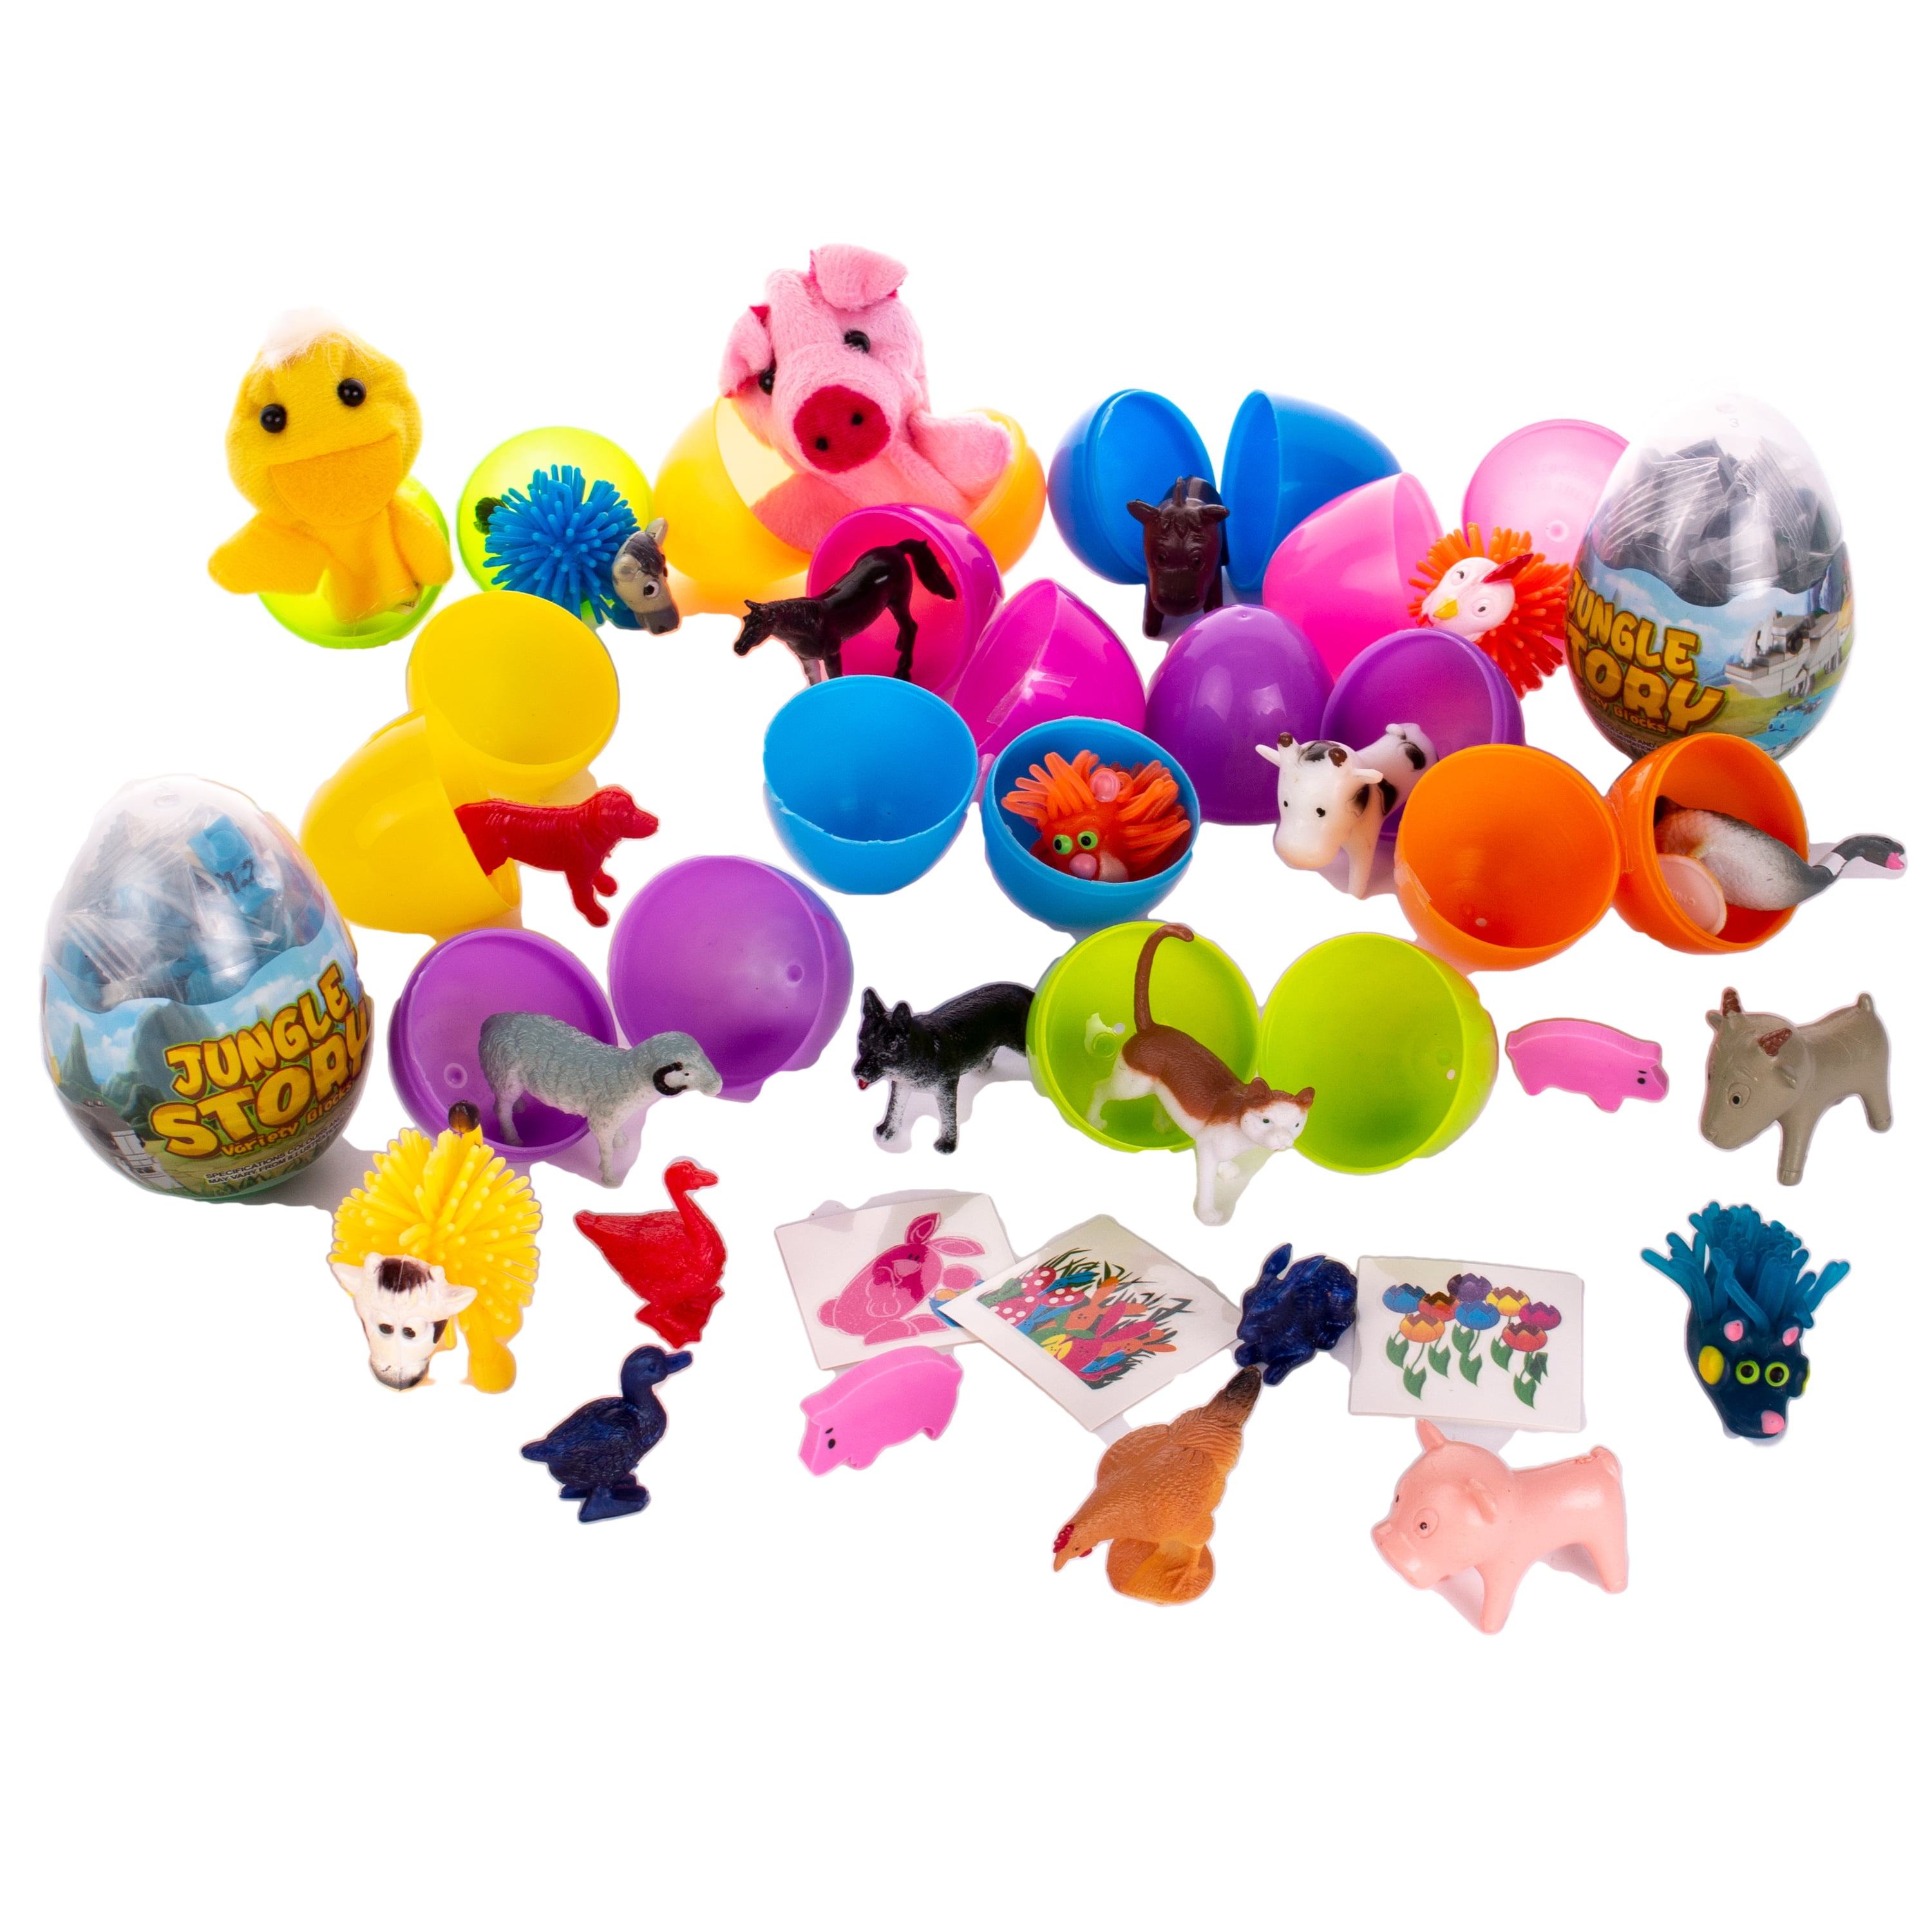 Dinosaur & Vehicle Erasers Easter Basket Stuffers 36 Pcs Pre Filled Easter Eggs with Mixed Puzzle Erasers Including Animal Pencil Erasers Filled Eggs for Kids Easter Eggs Hunt Easter Party Favors 